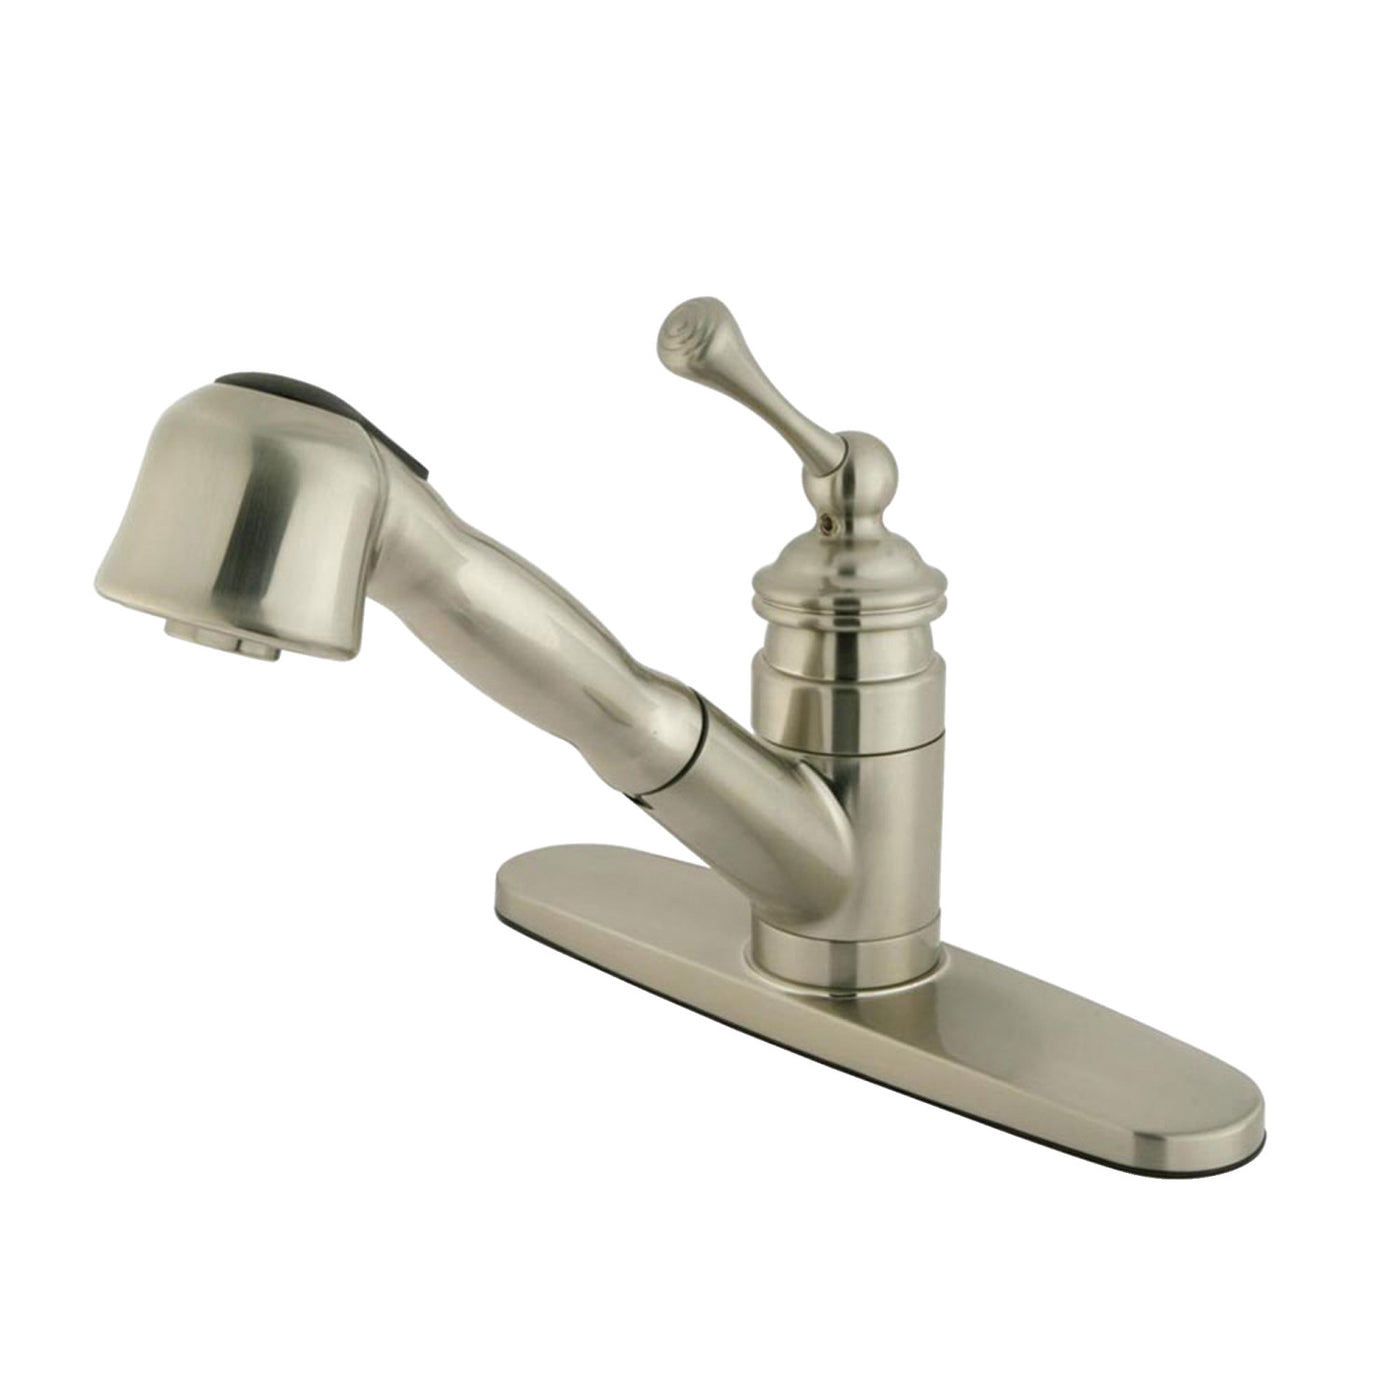 Elements of Design EB3898BL Single-Handle Pull-Out Kitchen Faucet, Brushed Nickel